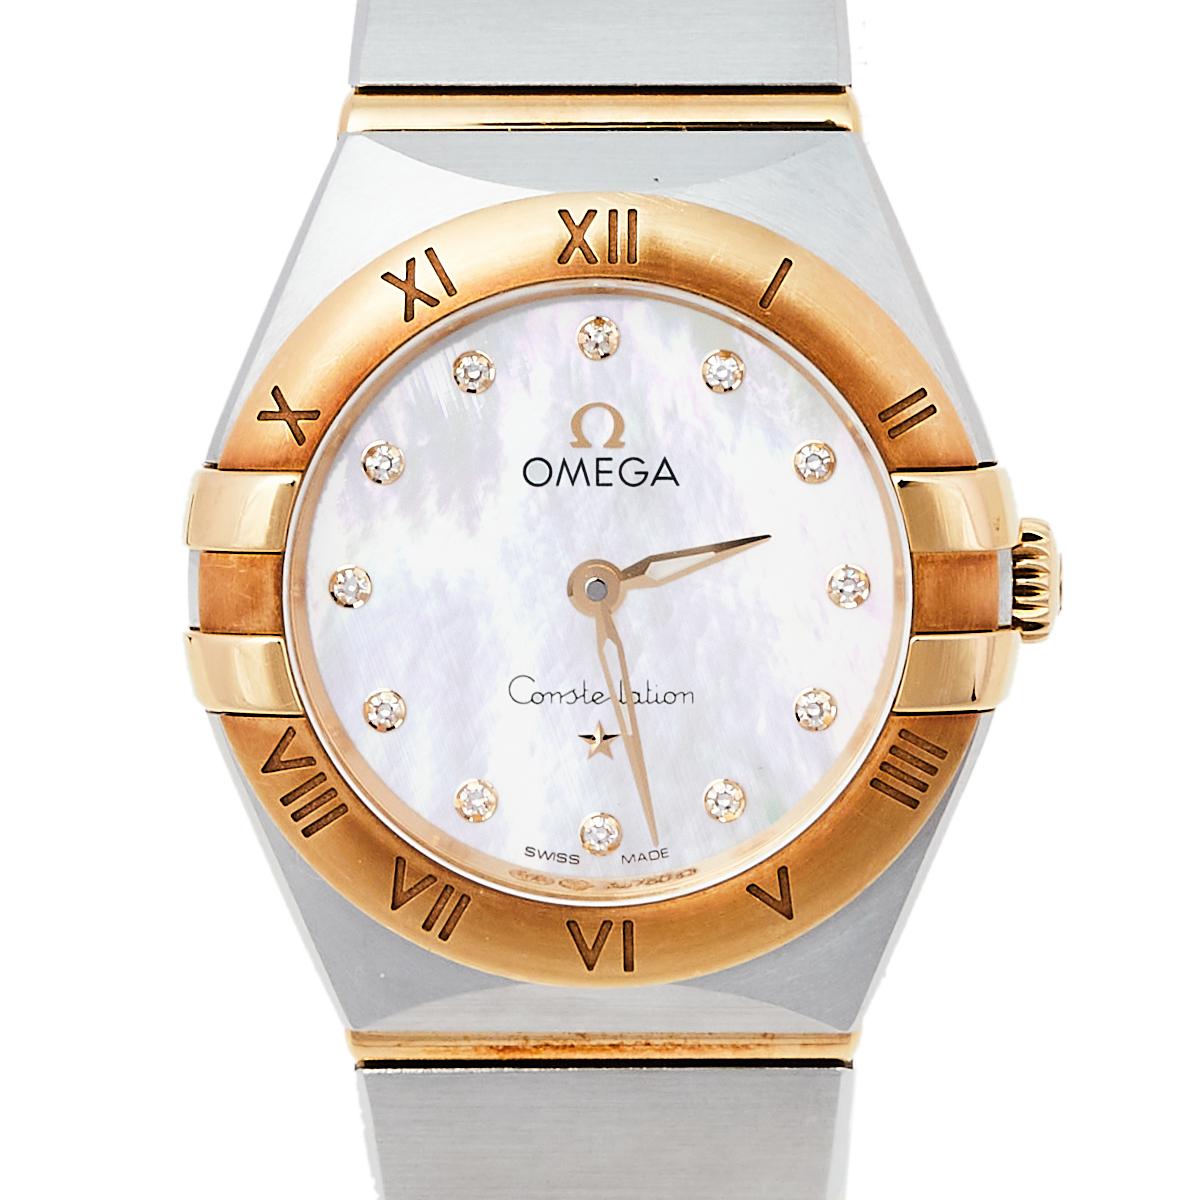 Omega brings you this gorgeous timepiece from their famous Constellation collection to flaunt on your wrist. It is crafted from stainless steel and set to function in the quartz movement. Swiss-made, it carries a scratch‑resistant sapphire crystal